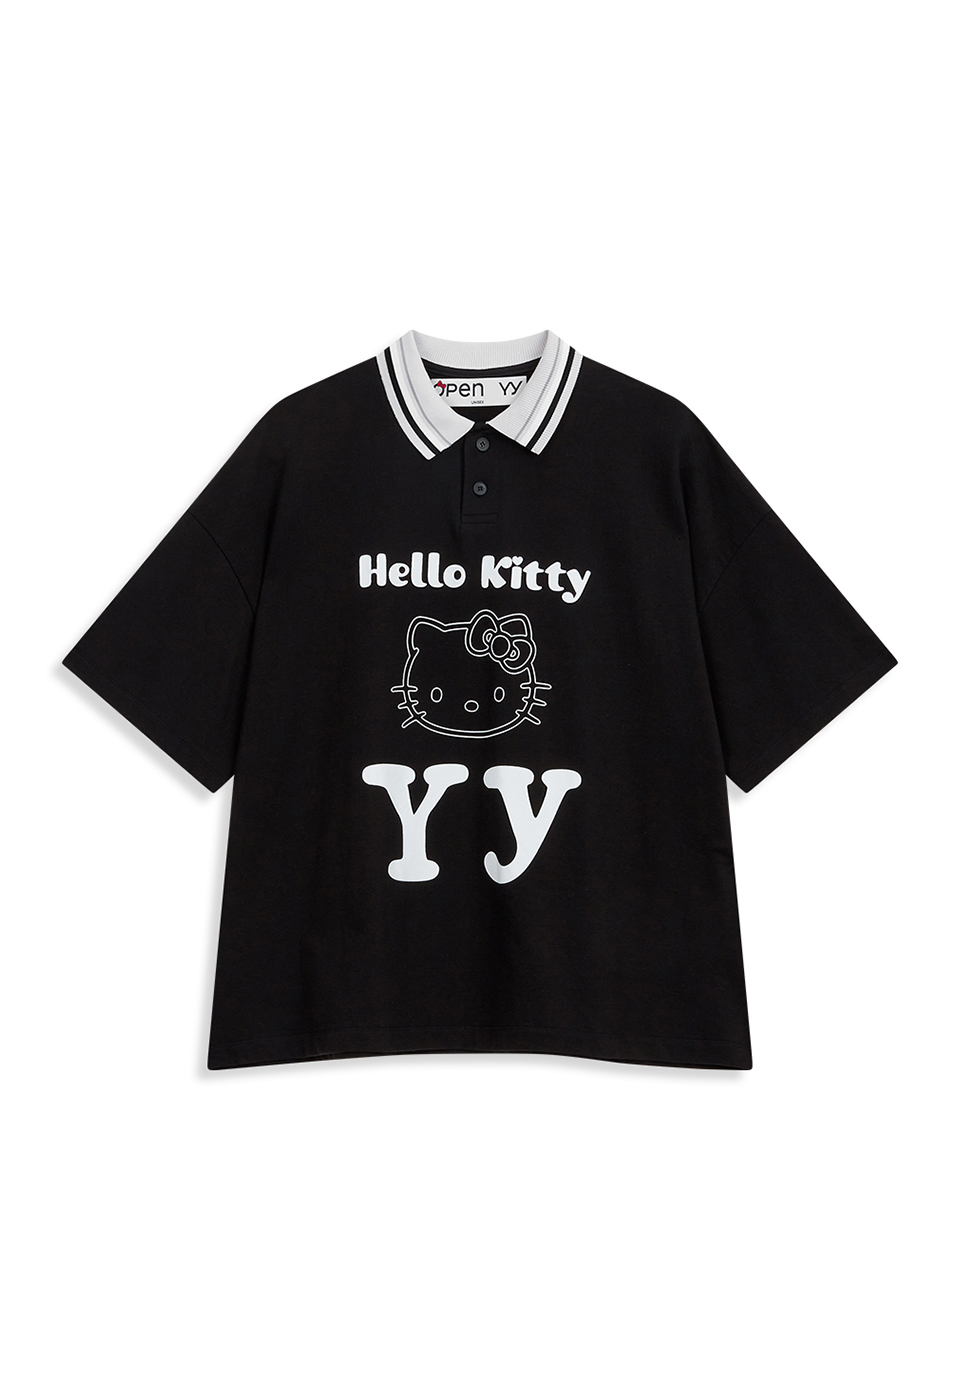 [6/10 DELIVERY] HELLO KITTY X YY COLLARED T-SHIRT, BLACK